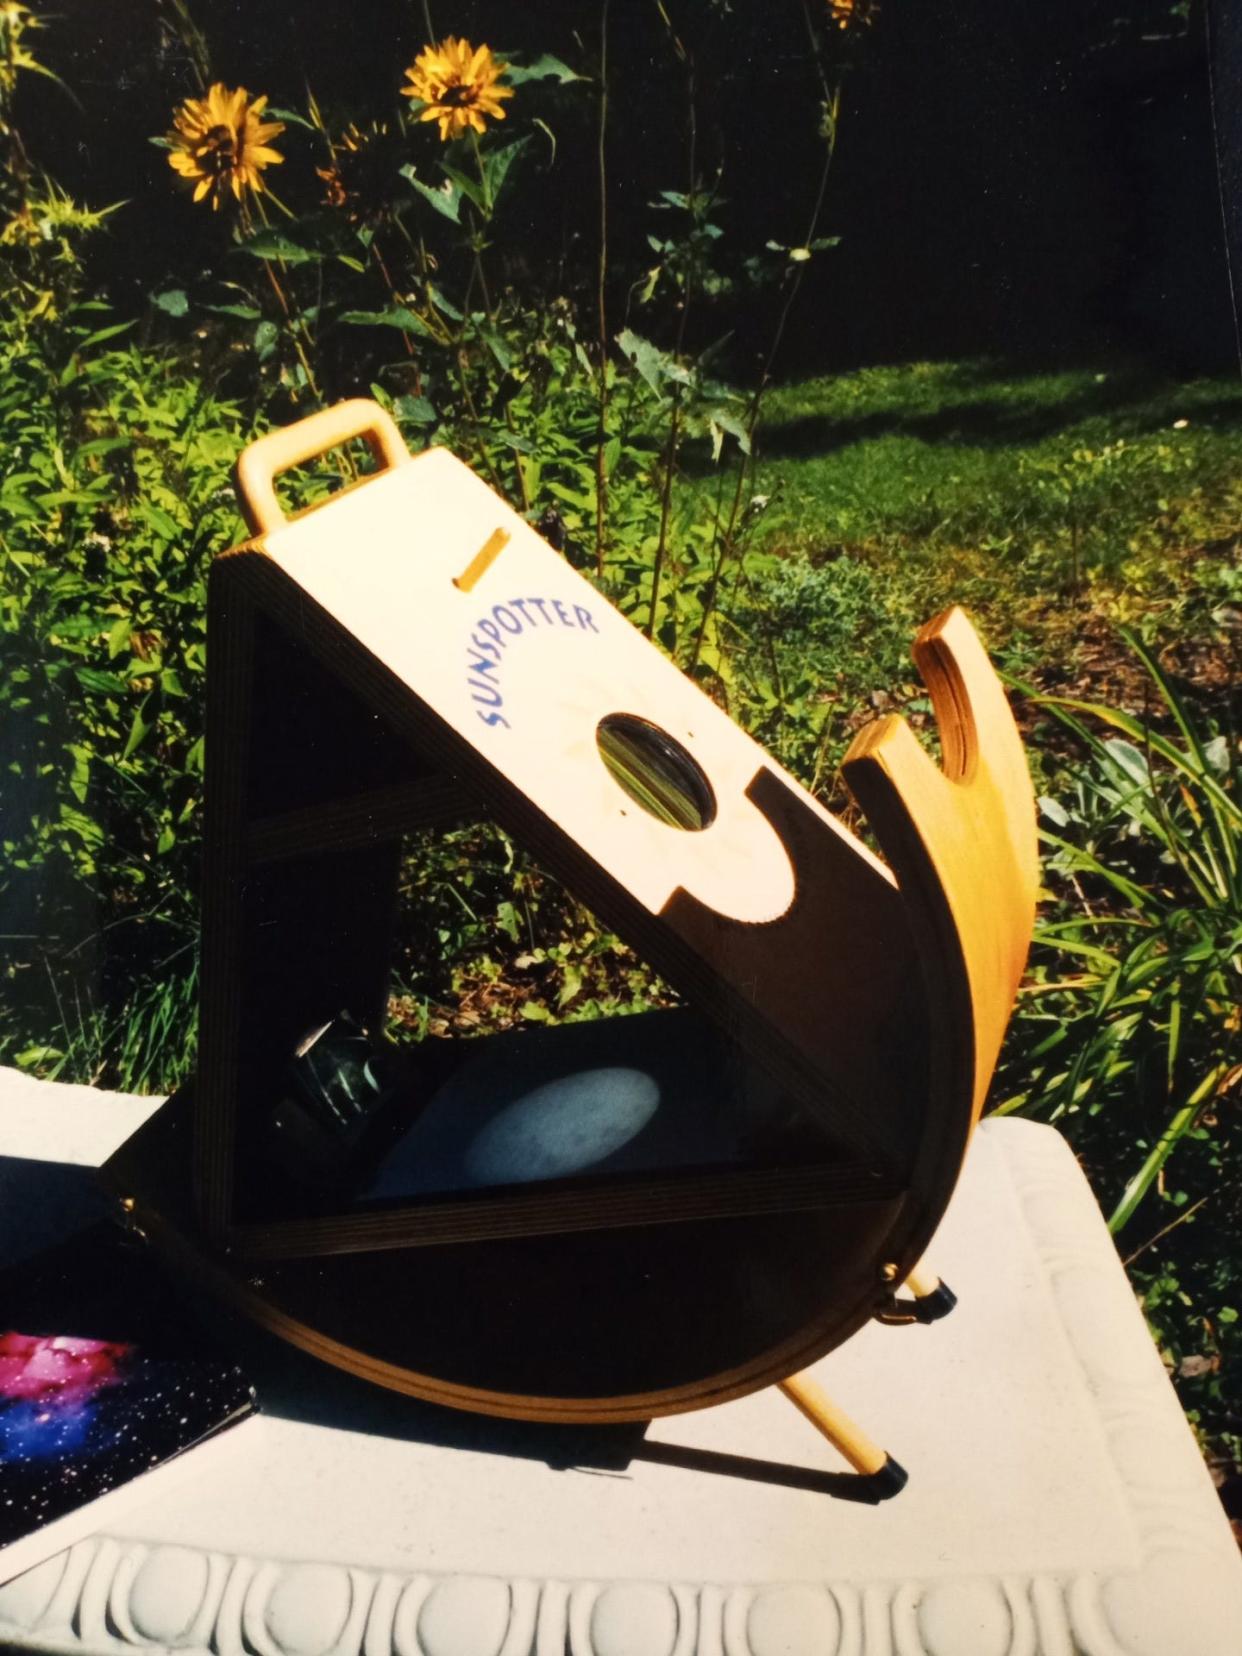 The Massachusetts firm Learning Technologies bought the patent for the Sunspotter from the inventor's widow in the late 1990s. The company improved on the design and added the wooden cradle to support it. The Sunspotter, an easy way to track sunspots on any sunny day and to see a solar eclipse, is now sold by numerous companies nationwide.